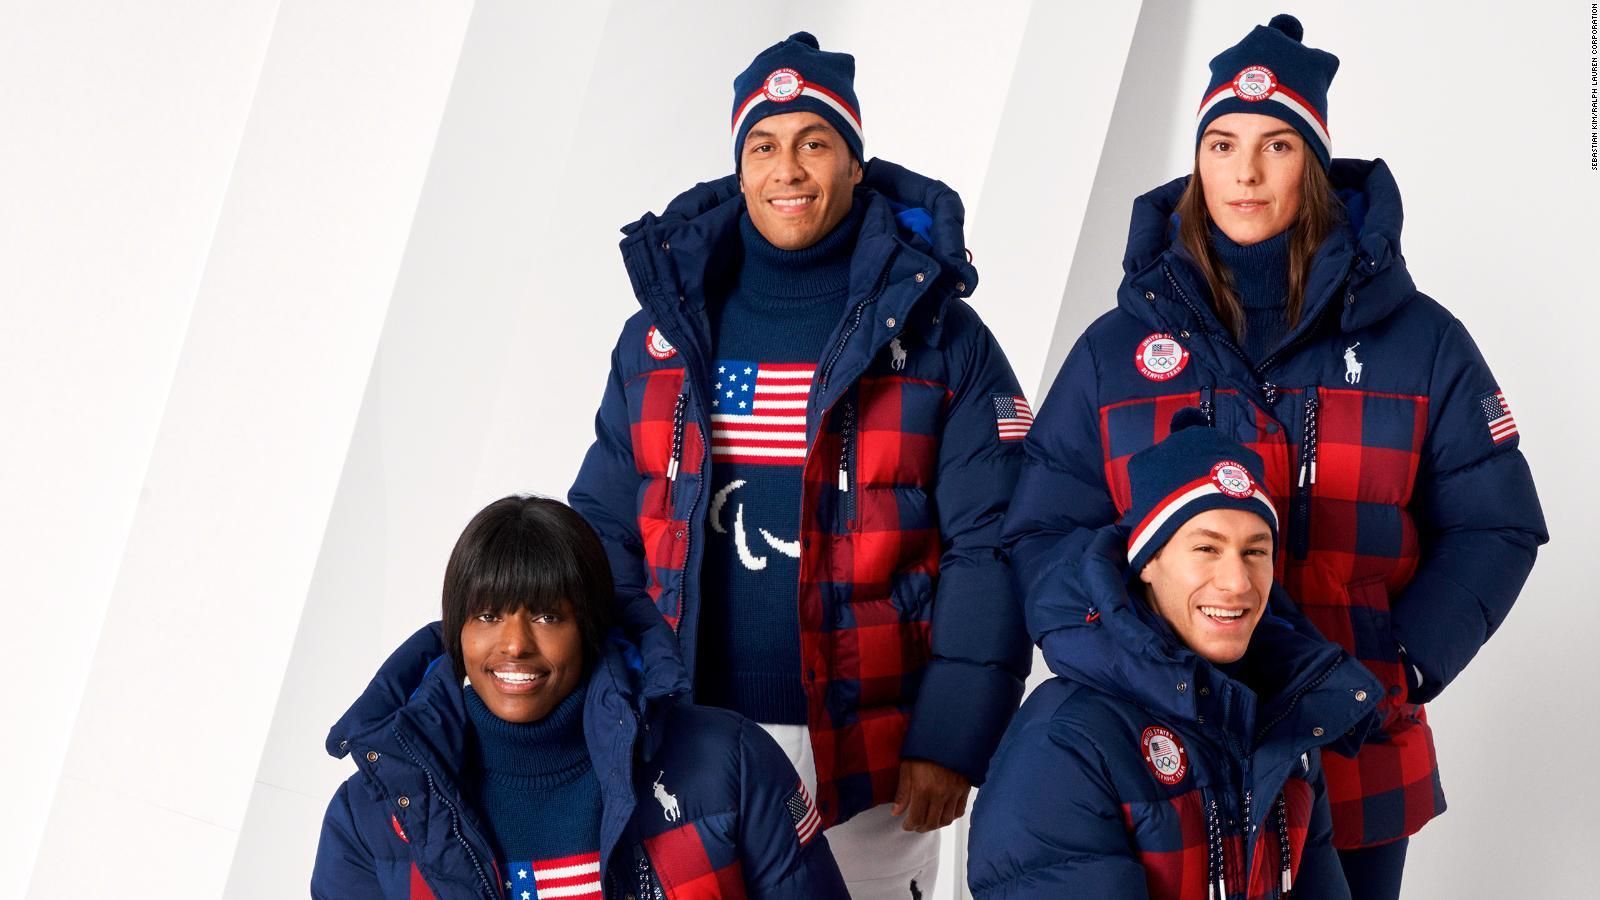 Winter Olympics 2022 Team outfits and brands behind them